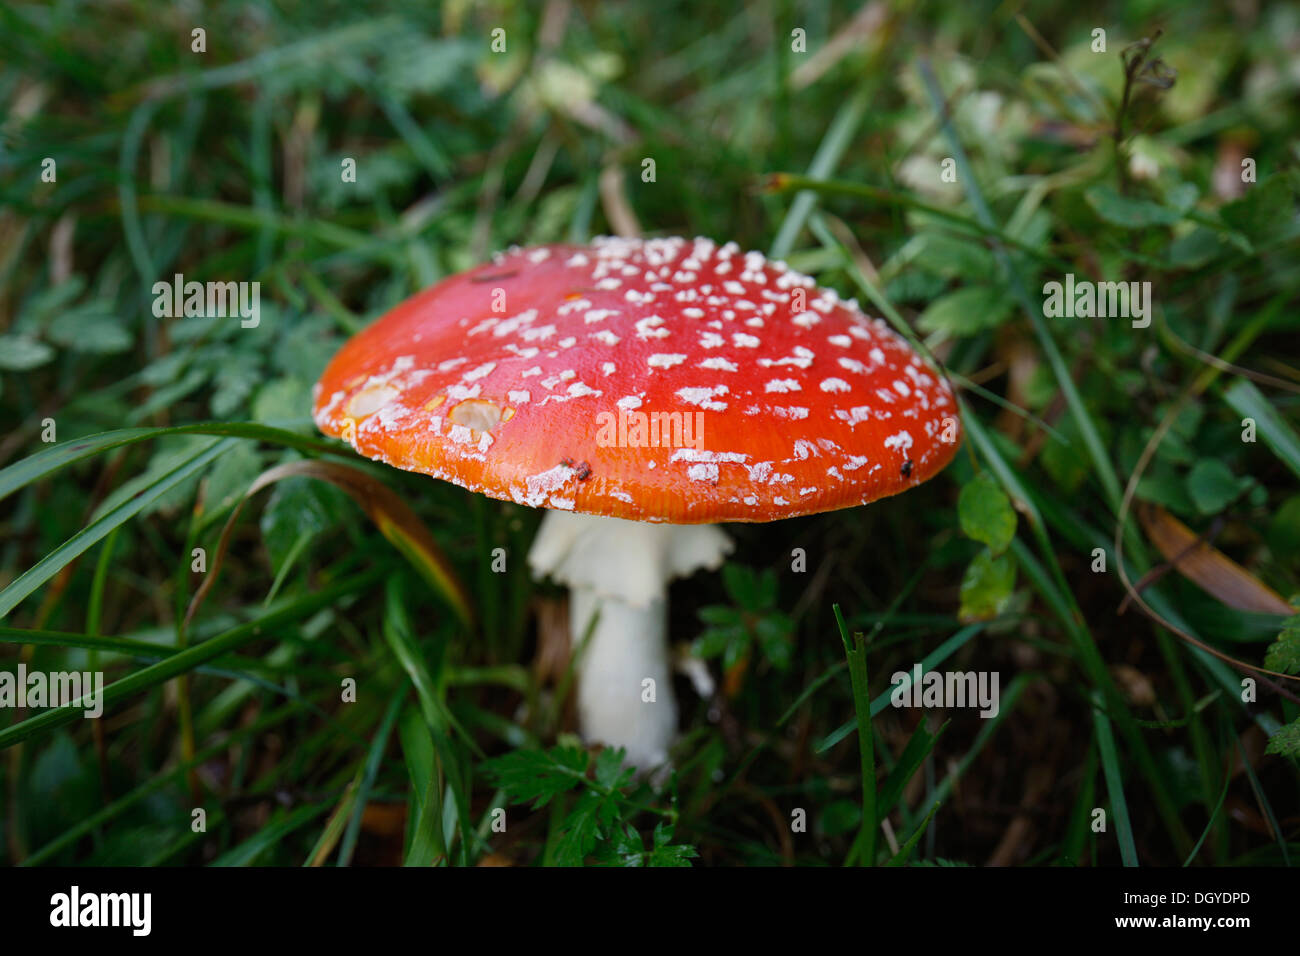 A fly agaric mushroom (Amanita muscaria) growing in grass Stock Photo